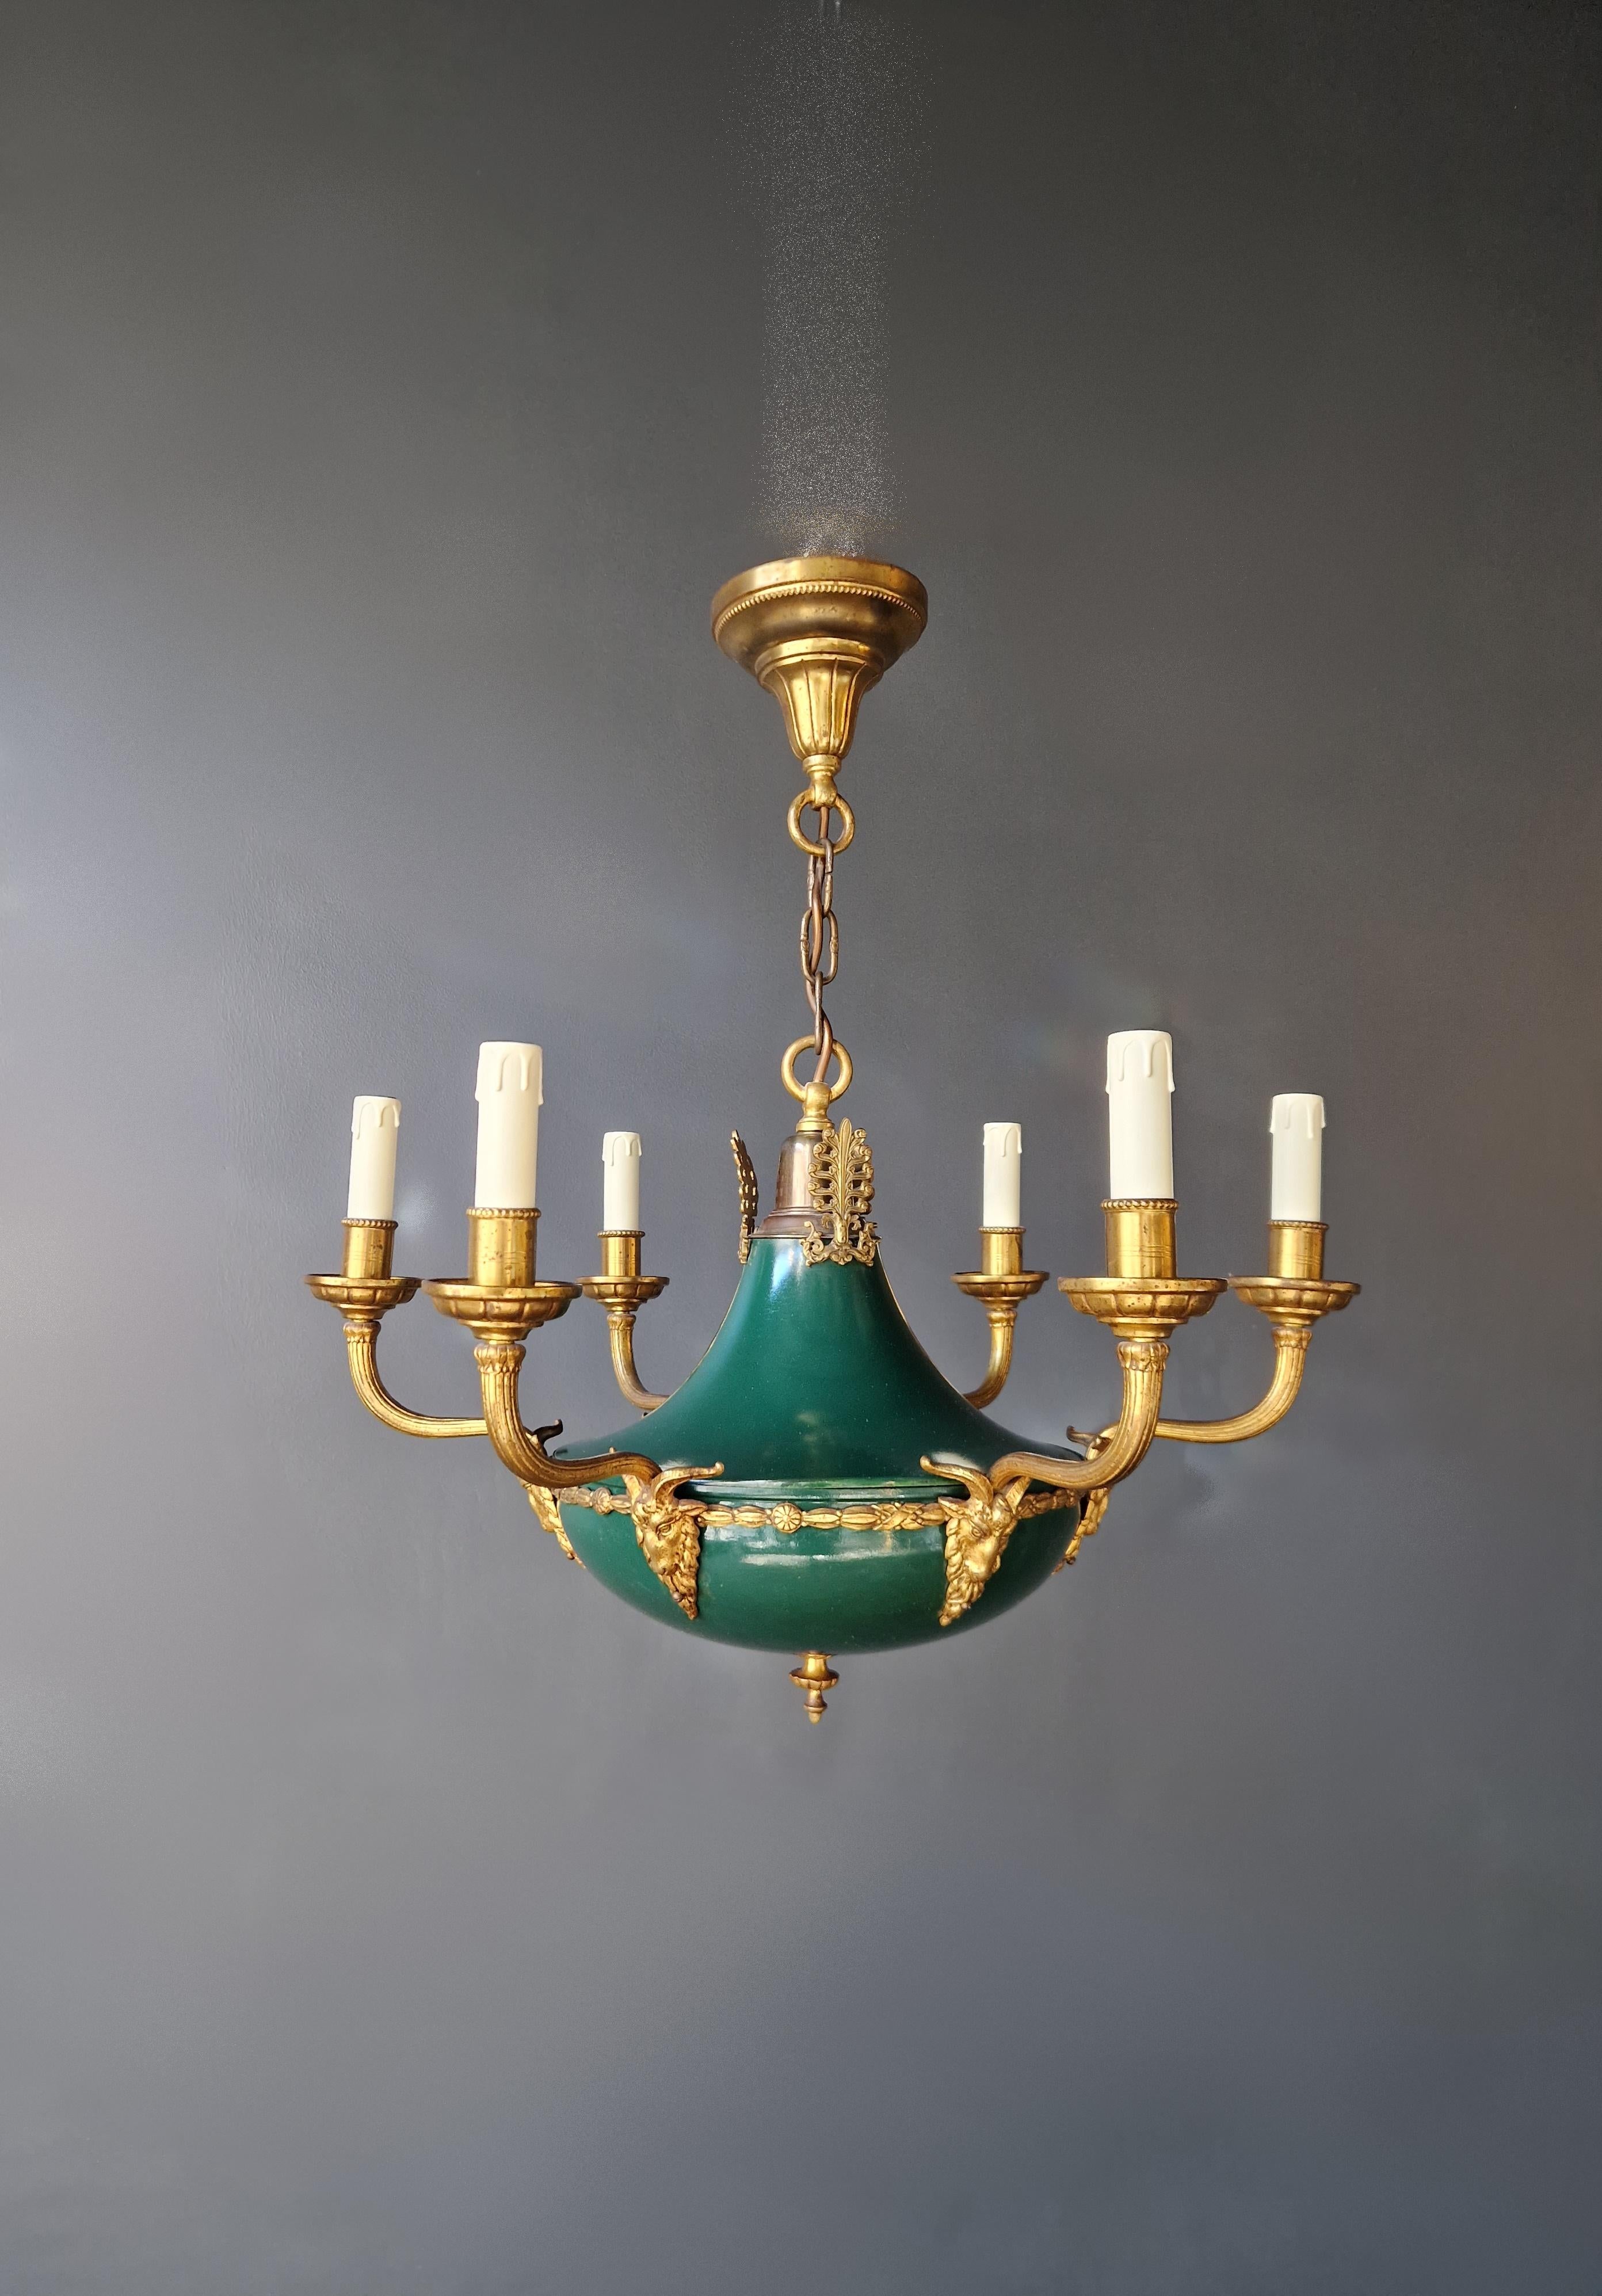 Introducing our exquisite Gilt Antique Empire Lustre Neoclassical Patina Green Brass Chandelier, a fine example of antique German Louis XVI style gilt bronze with patinated bronze.

This chandelier has undergone meticulous restoration, with cabling